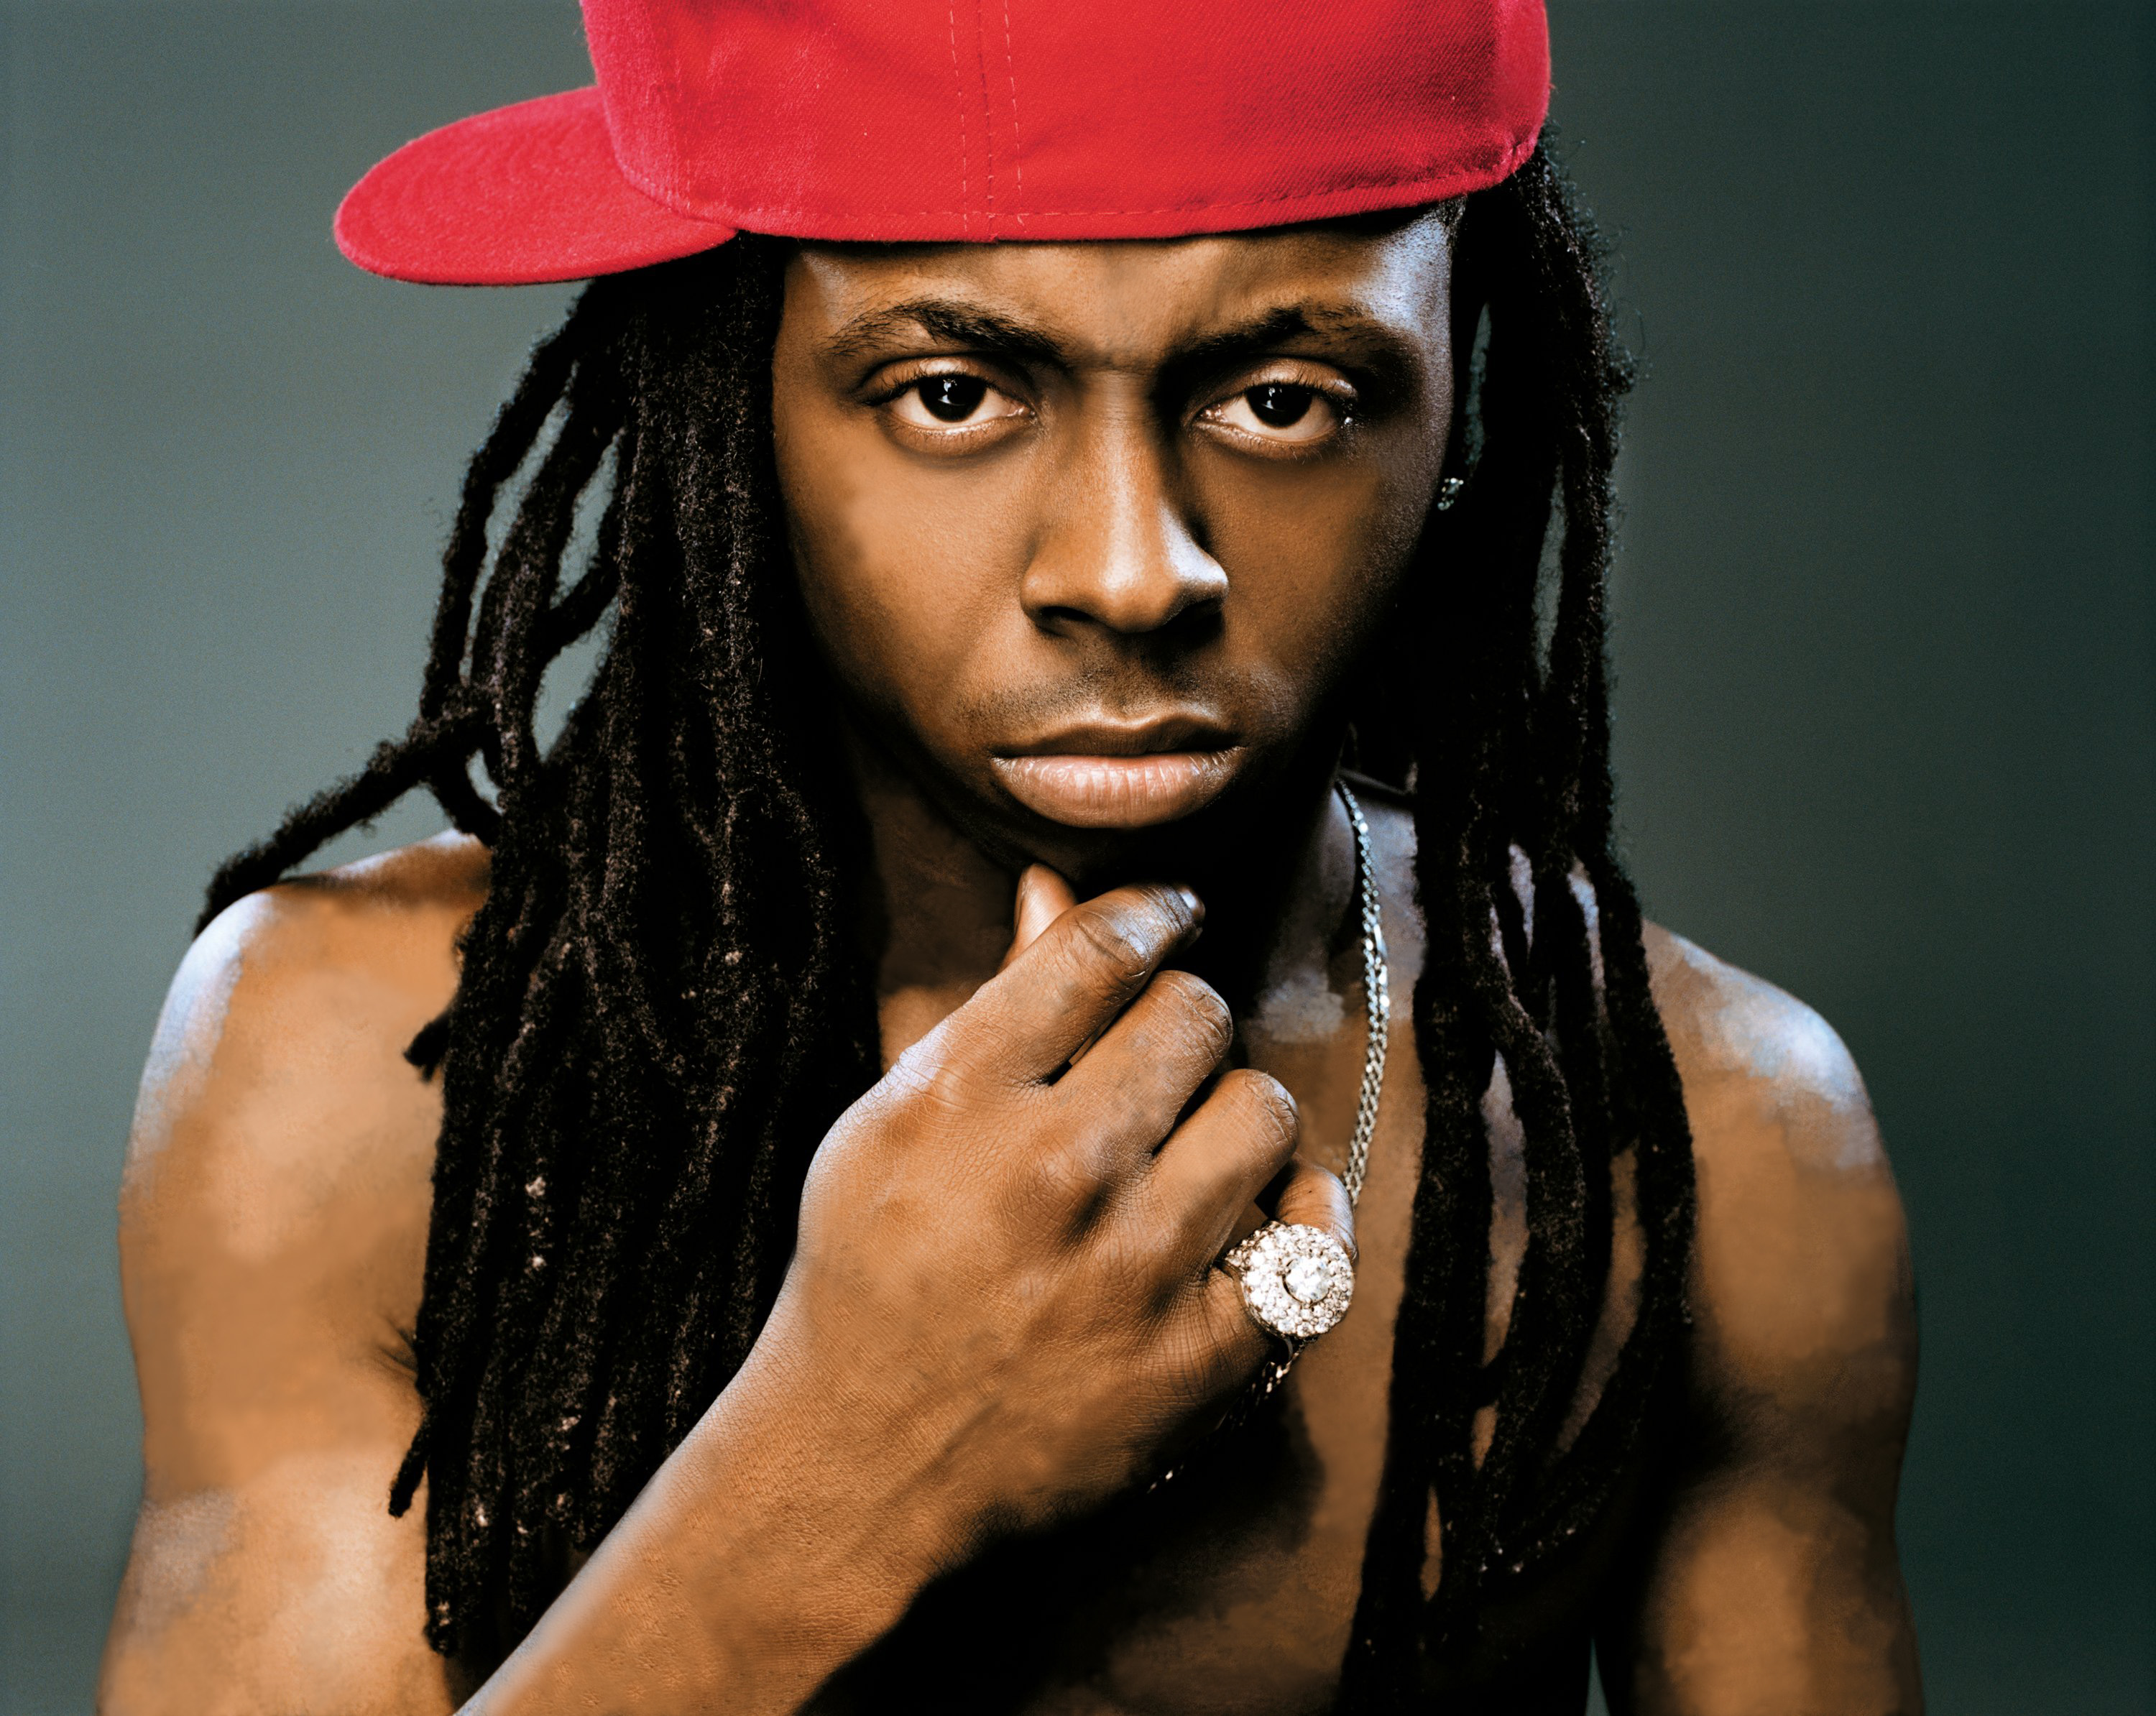 The Meaning Behind Lil Wayne's TNT Face Tattoo